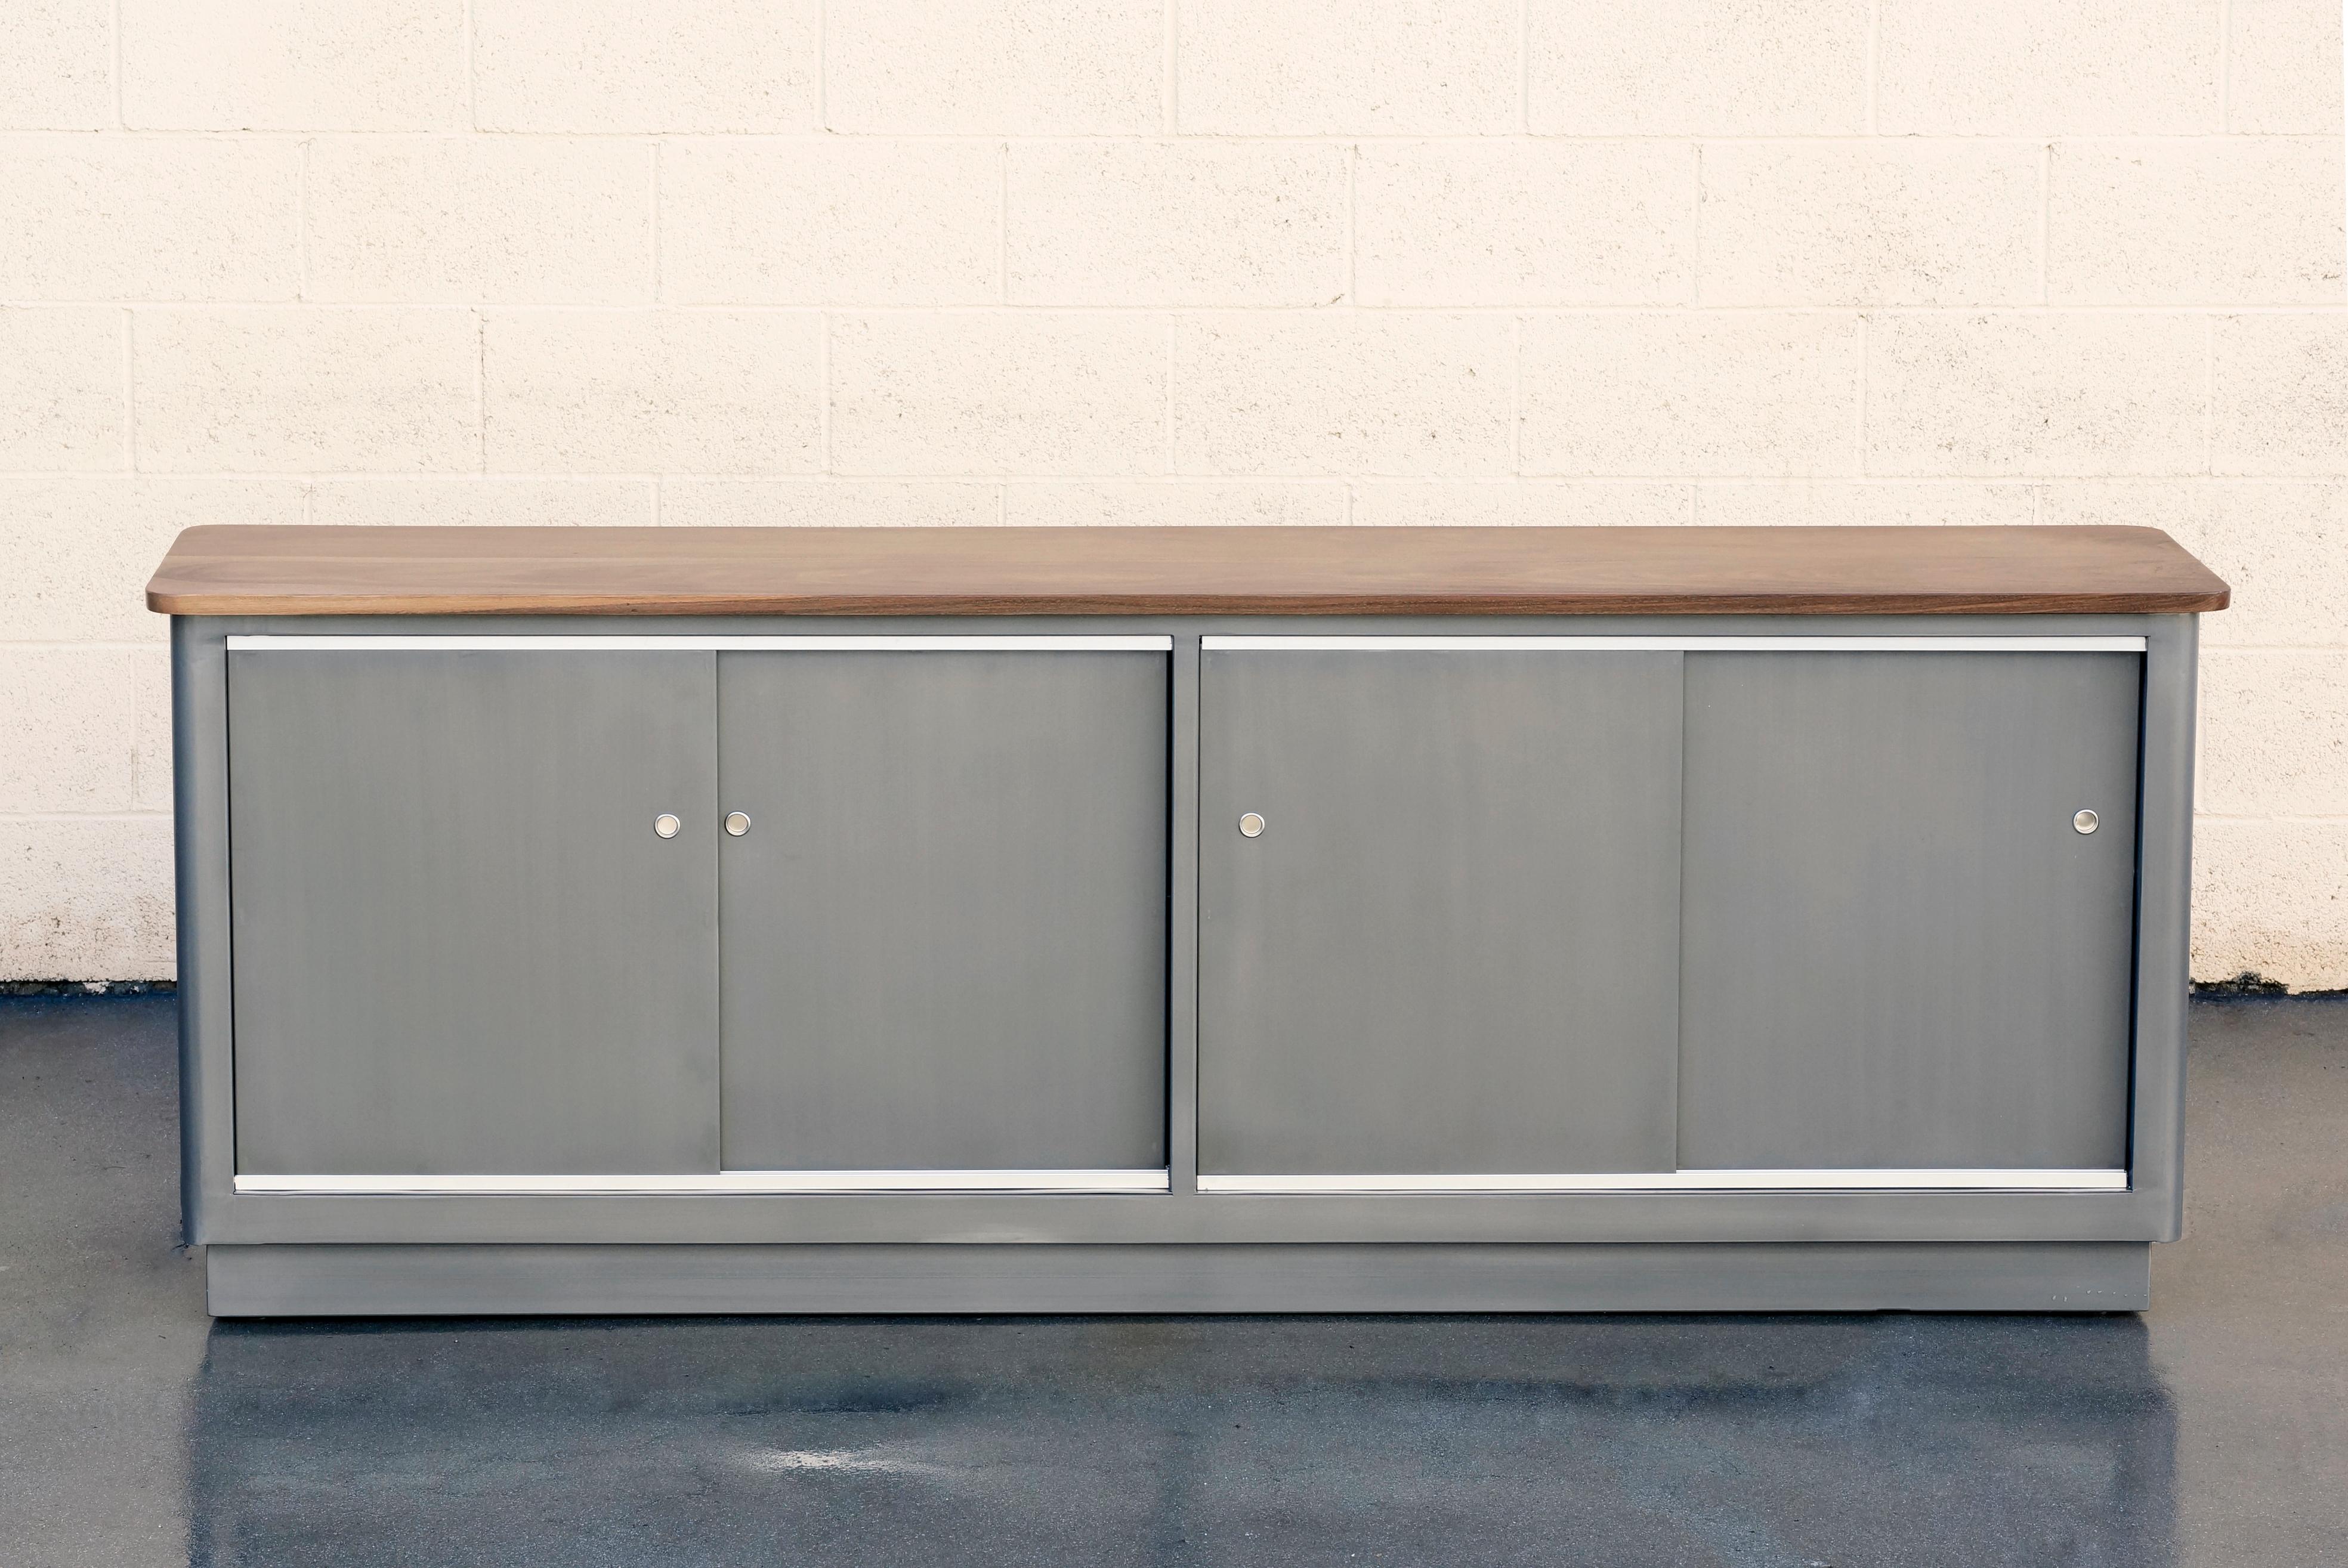 Custom made steel credenza with walnut top inspired by tanker style furniture popular in the 1960s. This beauty features a 